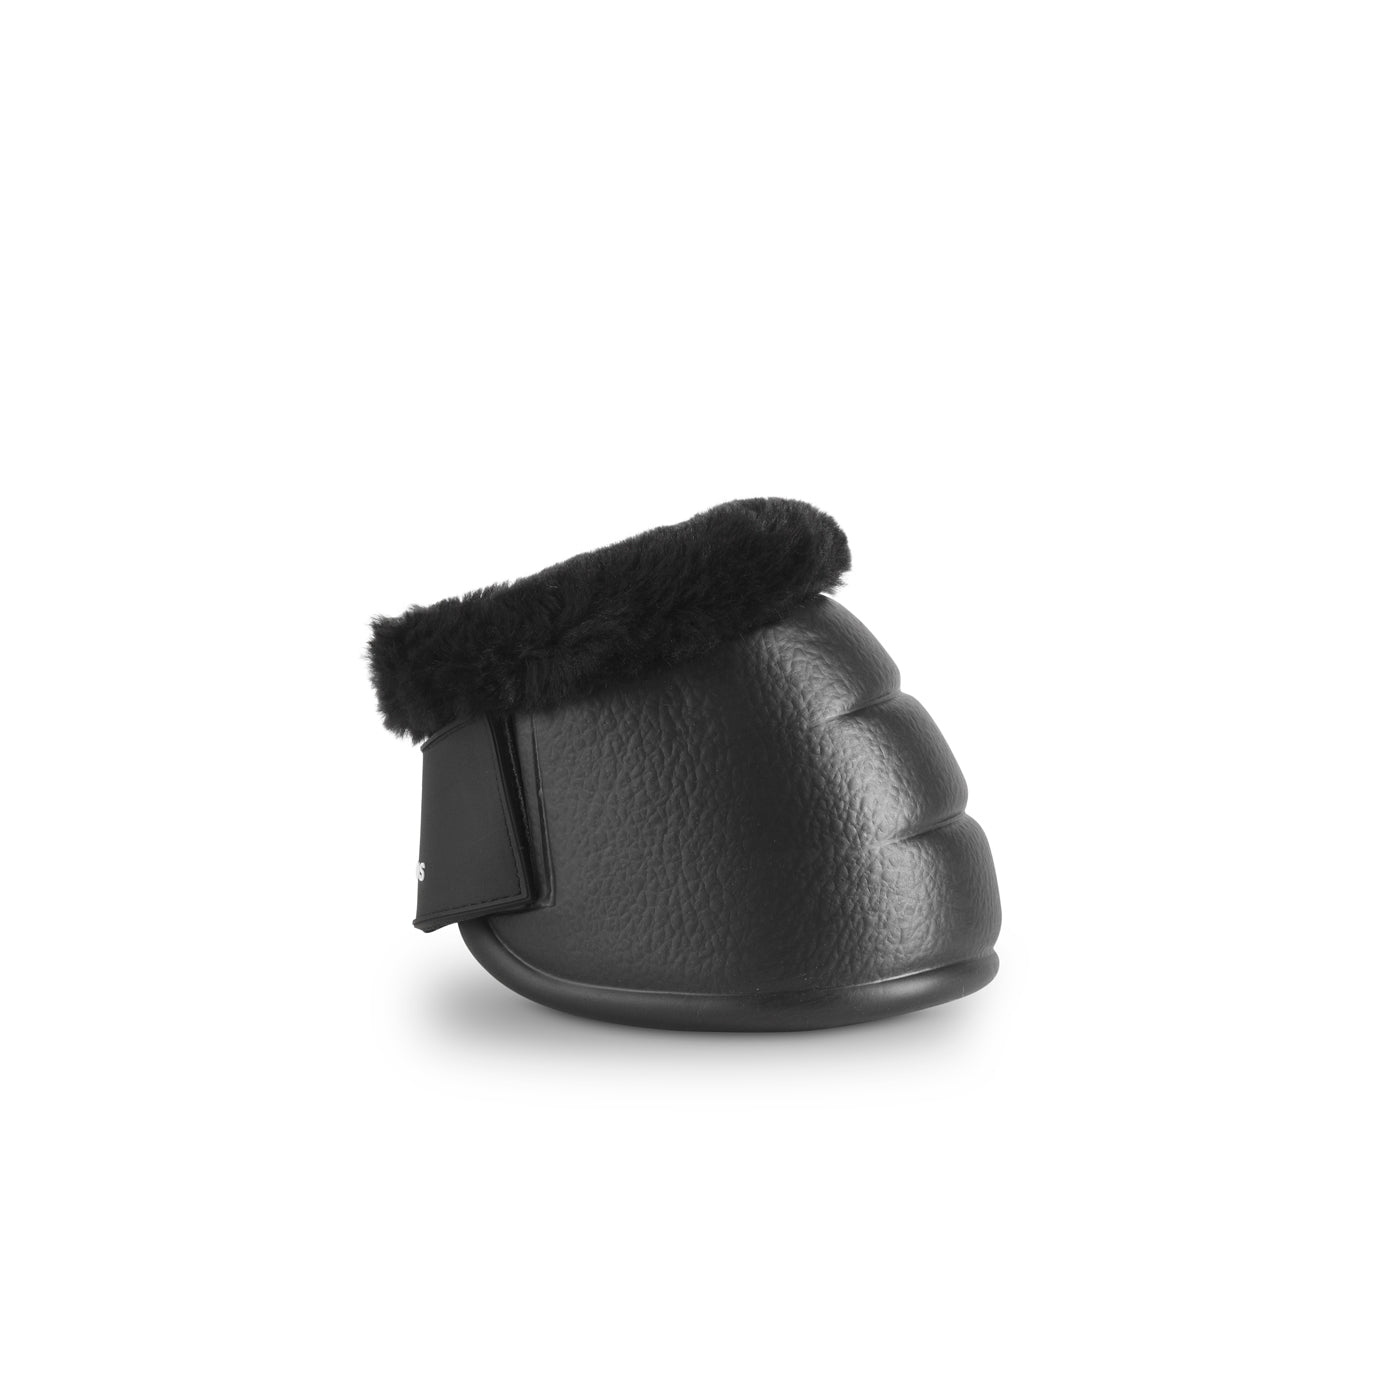 Gatusos Bell Boots Deluxe Synthetic Shearling, Black